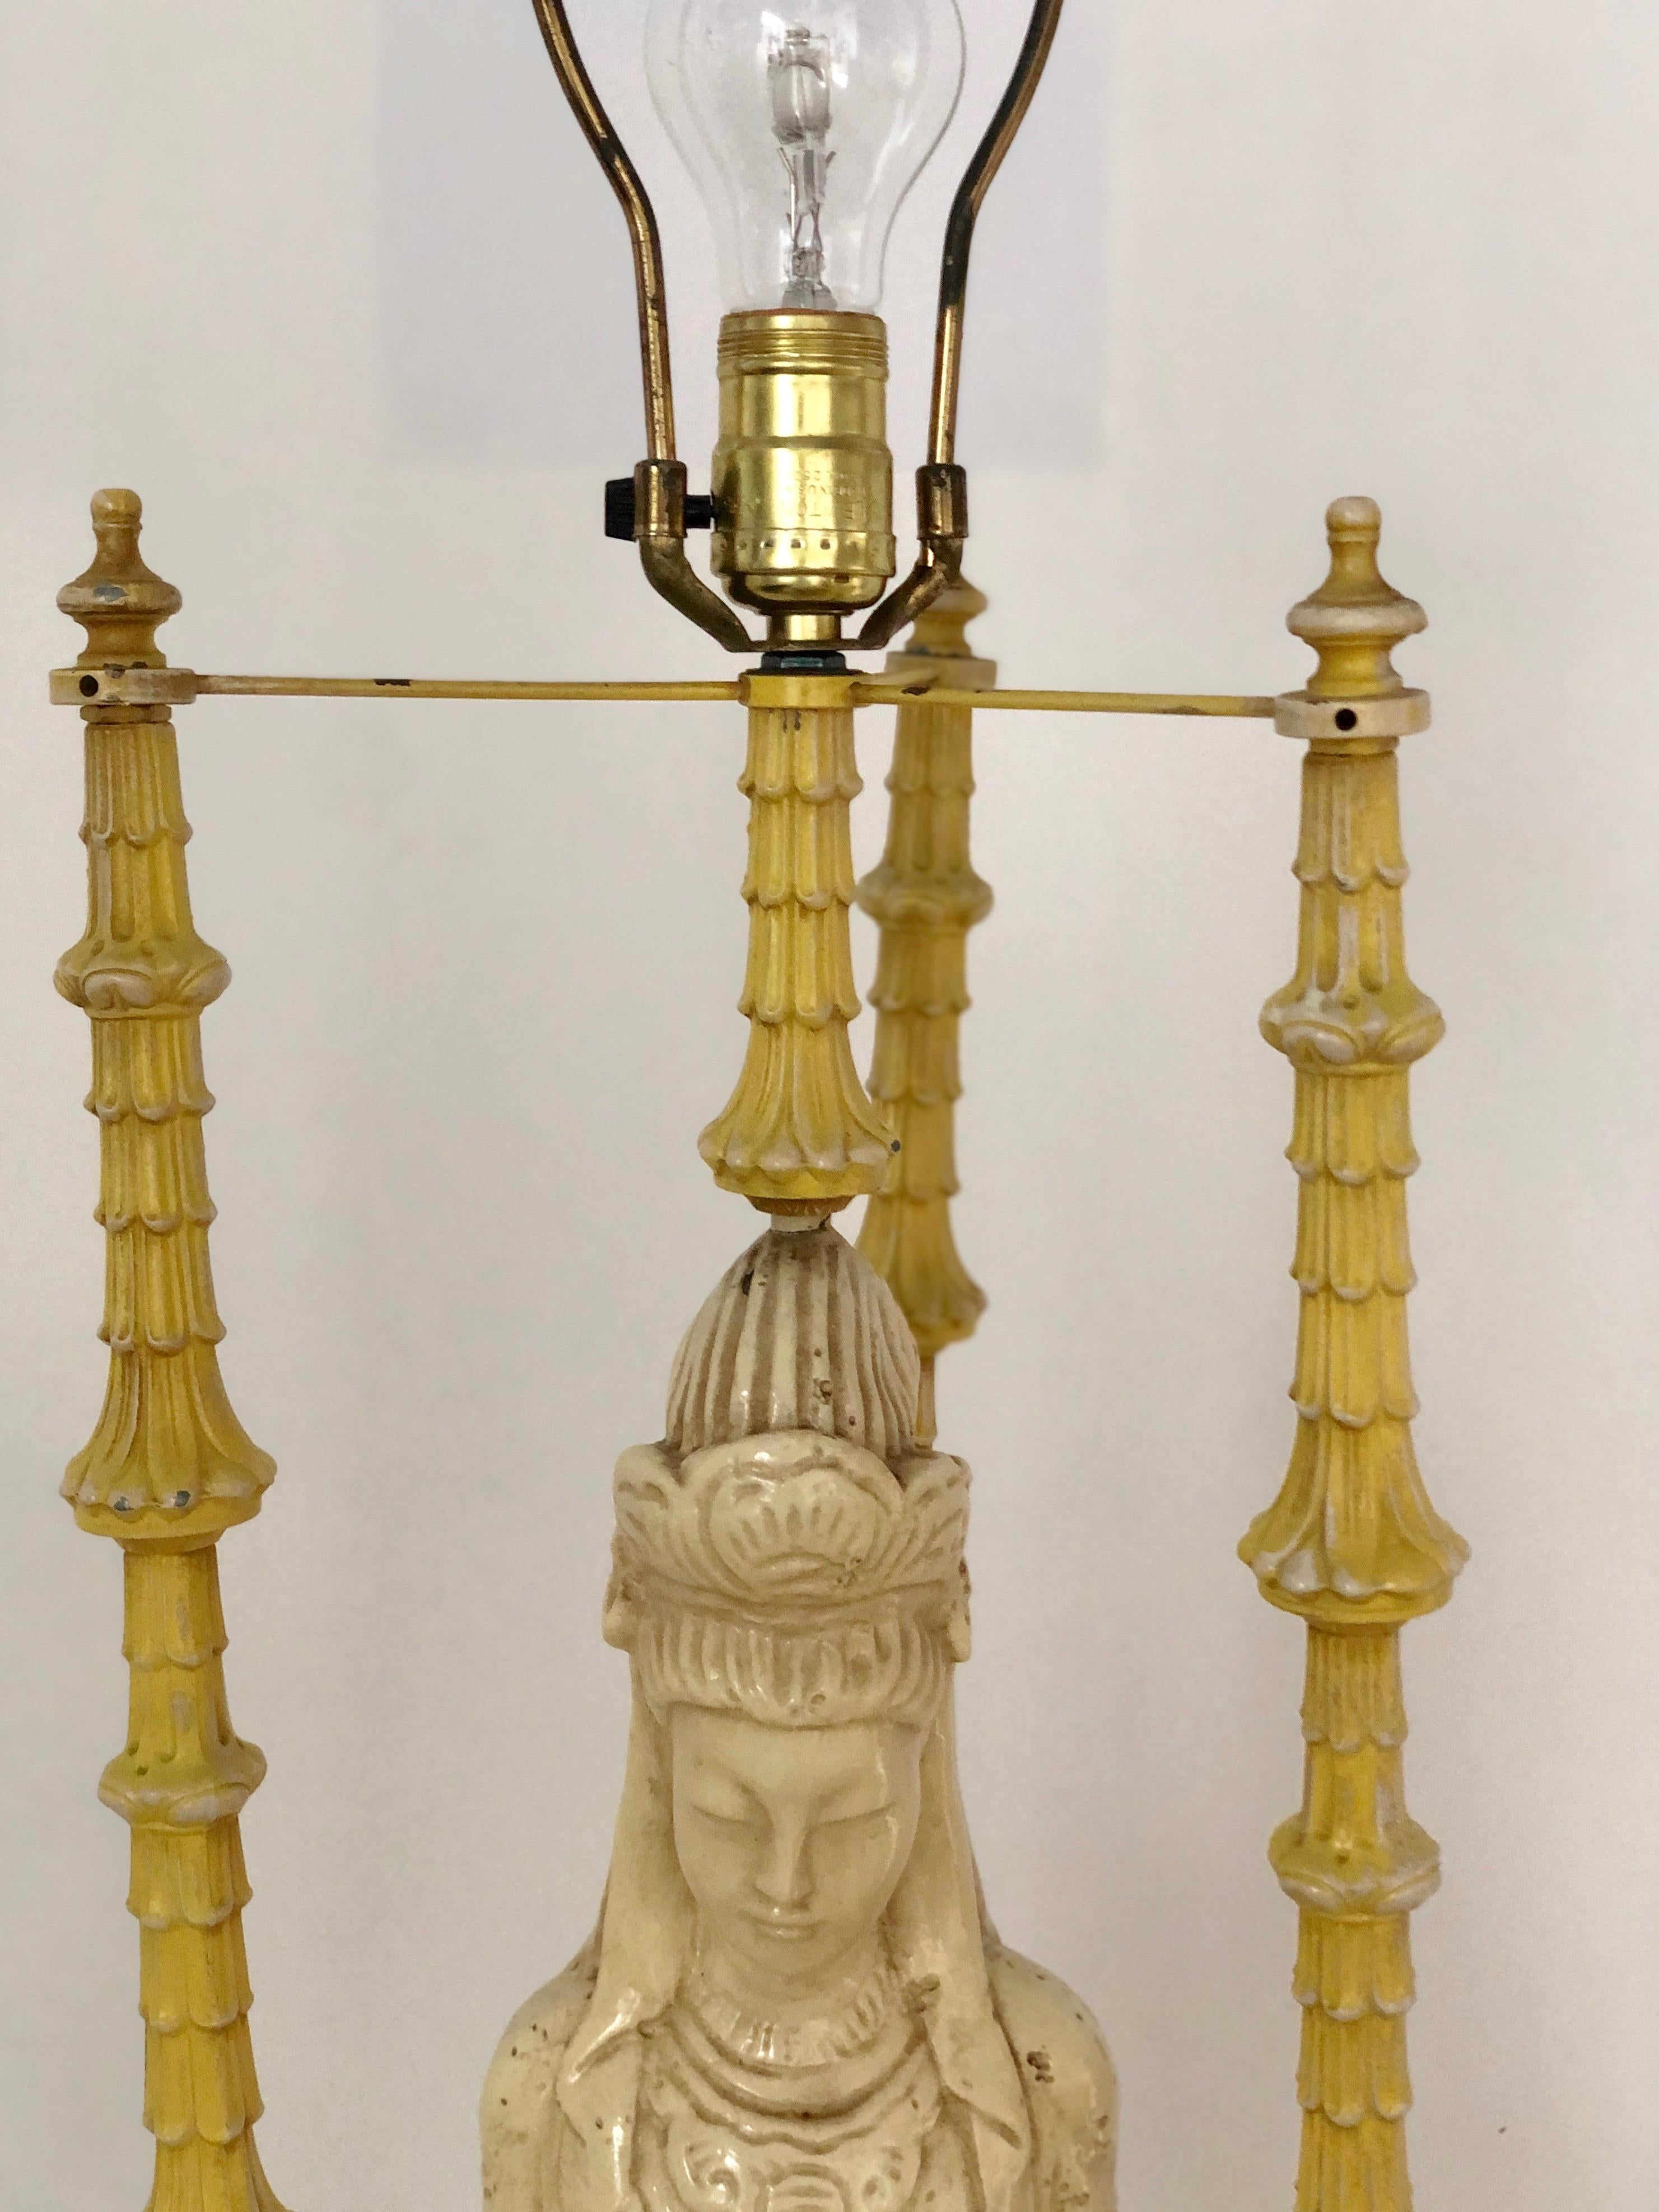 Offered is a Mid-Century Modern Hollywood Regency pair of James Mont Quan Yin chinoiserie style table lamps in a creamy antiqued ivory and pale butter cream yellow. This statuesque 